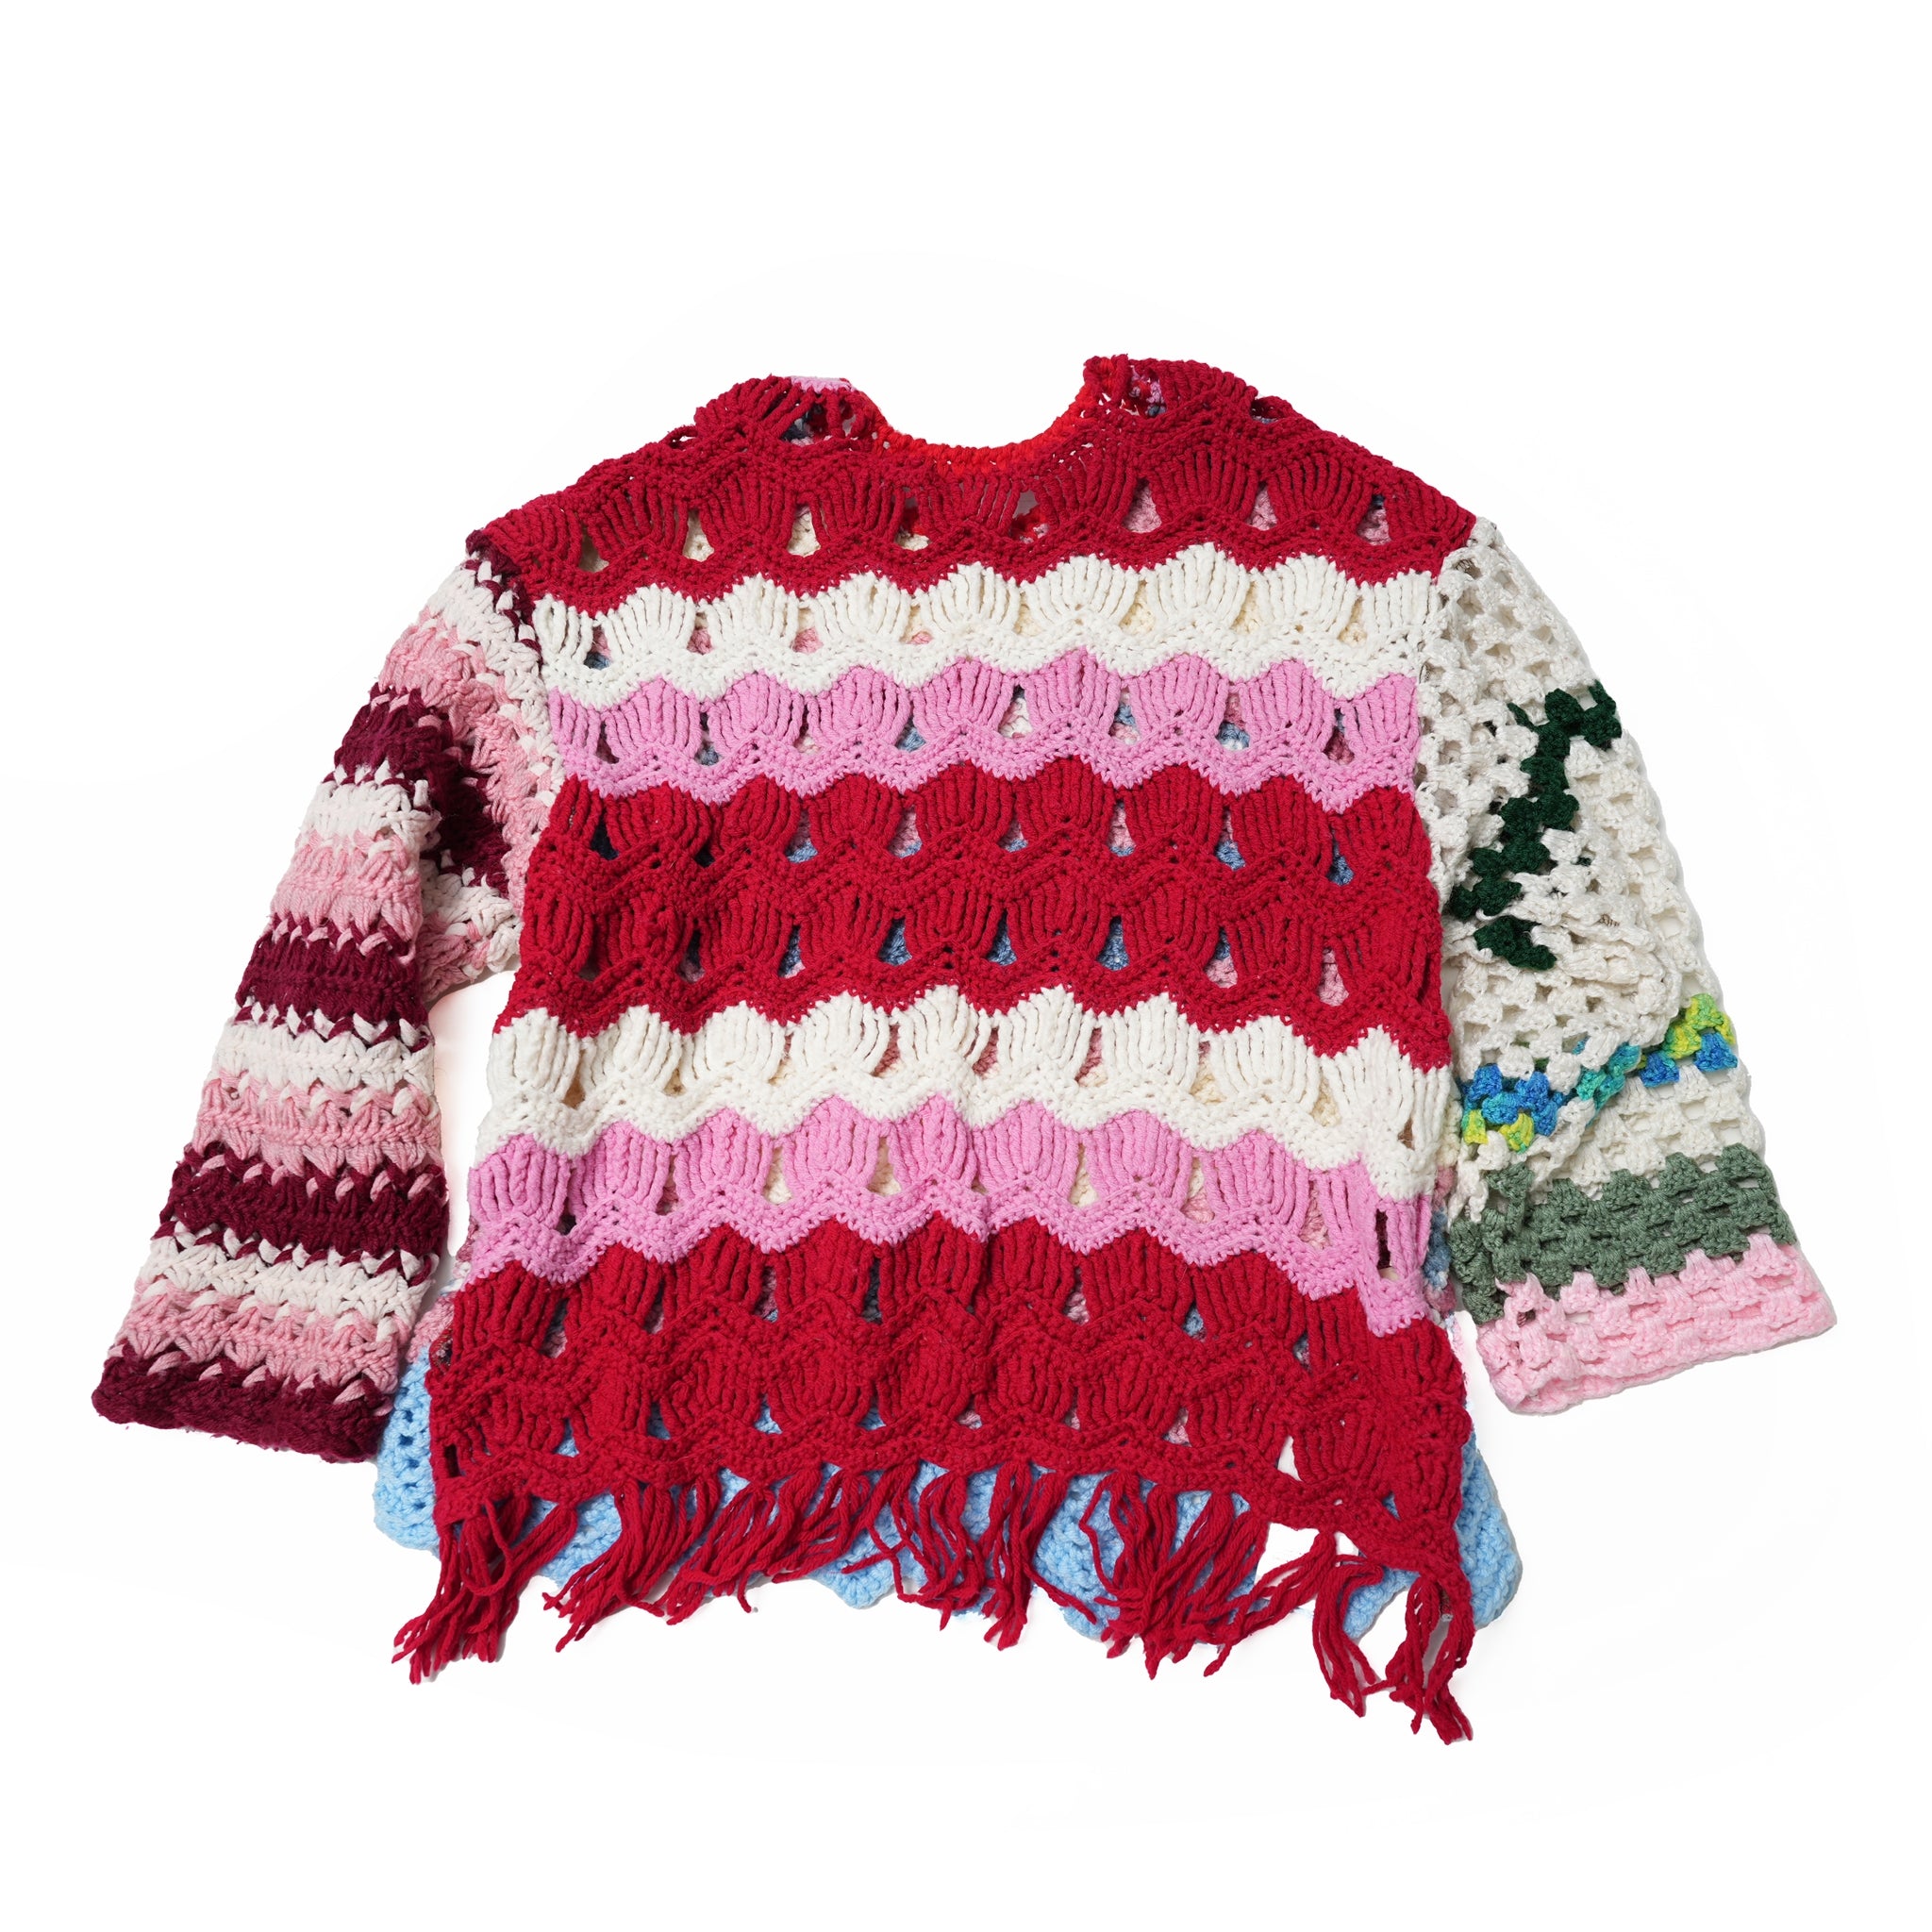 No:RK0437204_2023aw | Name:ASHBURY CREW KNIT | Color:Multi_A/Multi_B | Size:Free【NASNGWAM_ナスングワム】